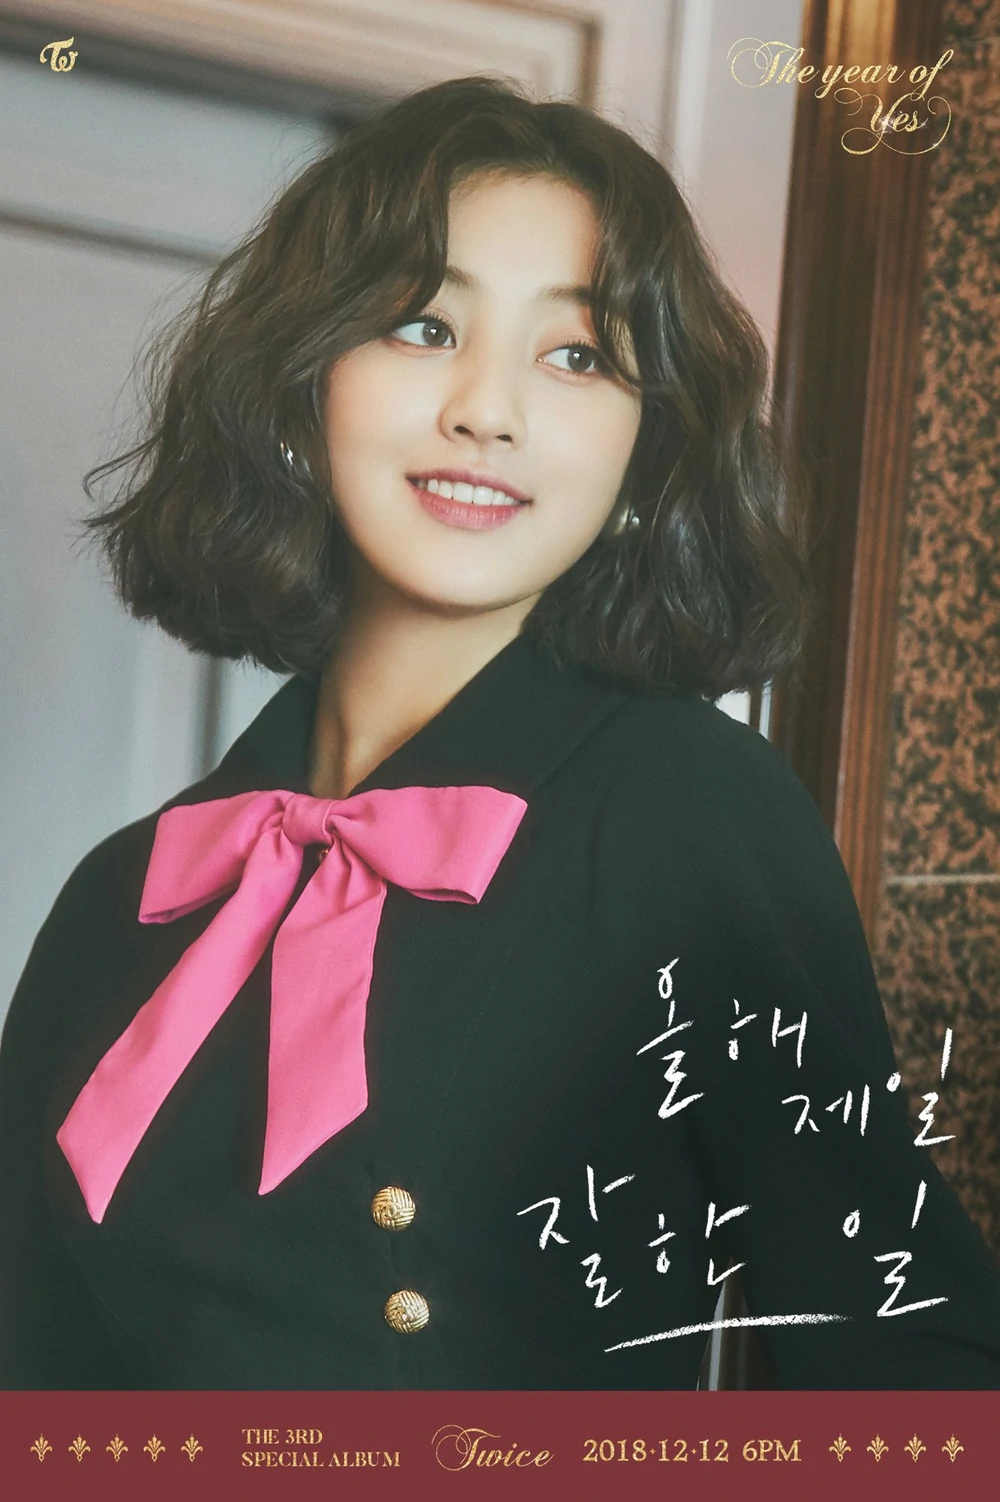 Twice Year Of Yes Jihyo Concept Teaser Picture Image Photo Kpop K-Concept 1